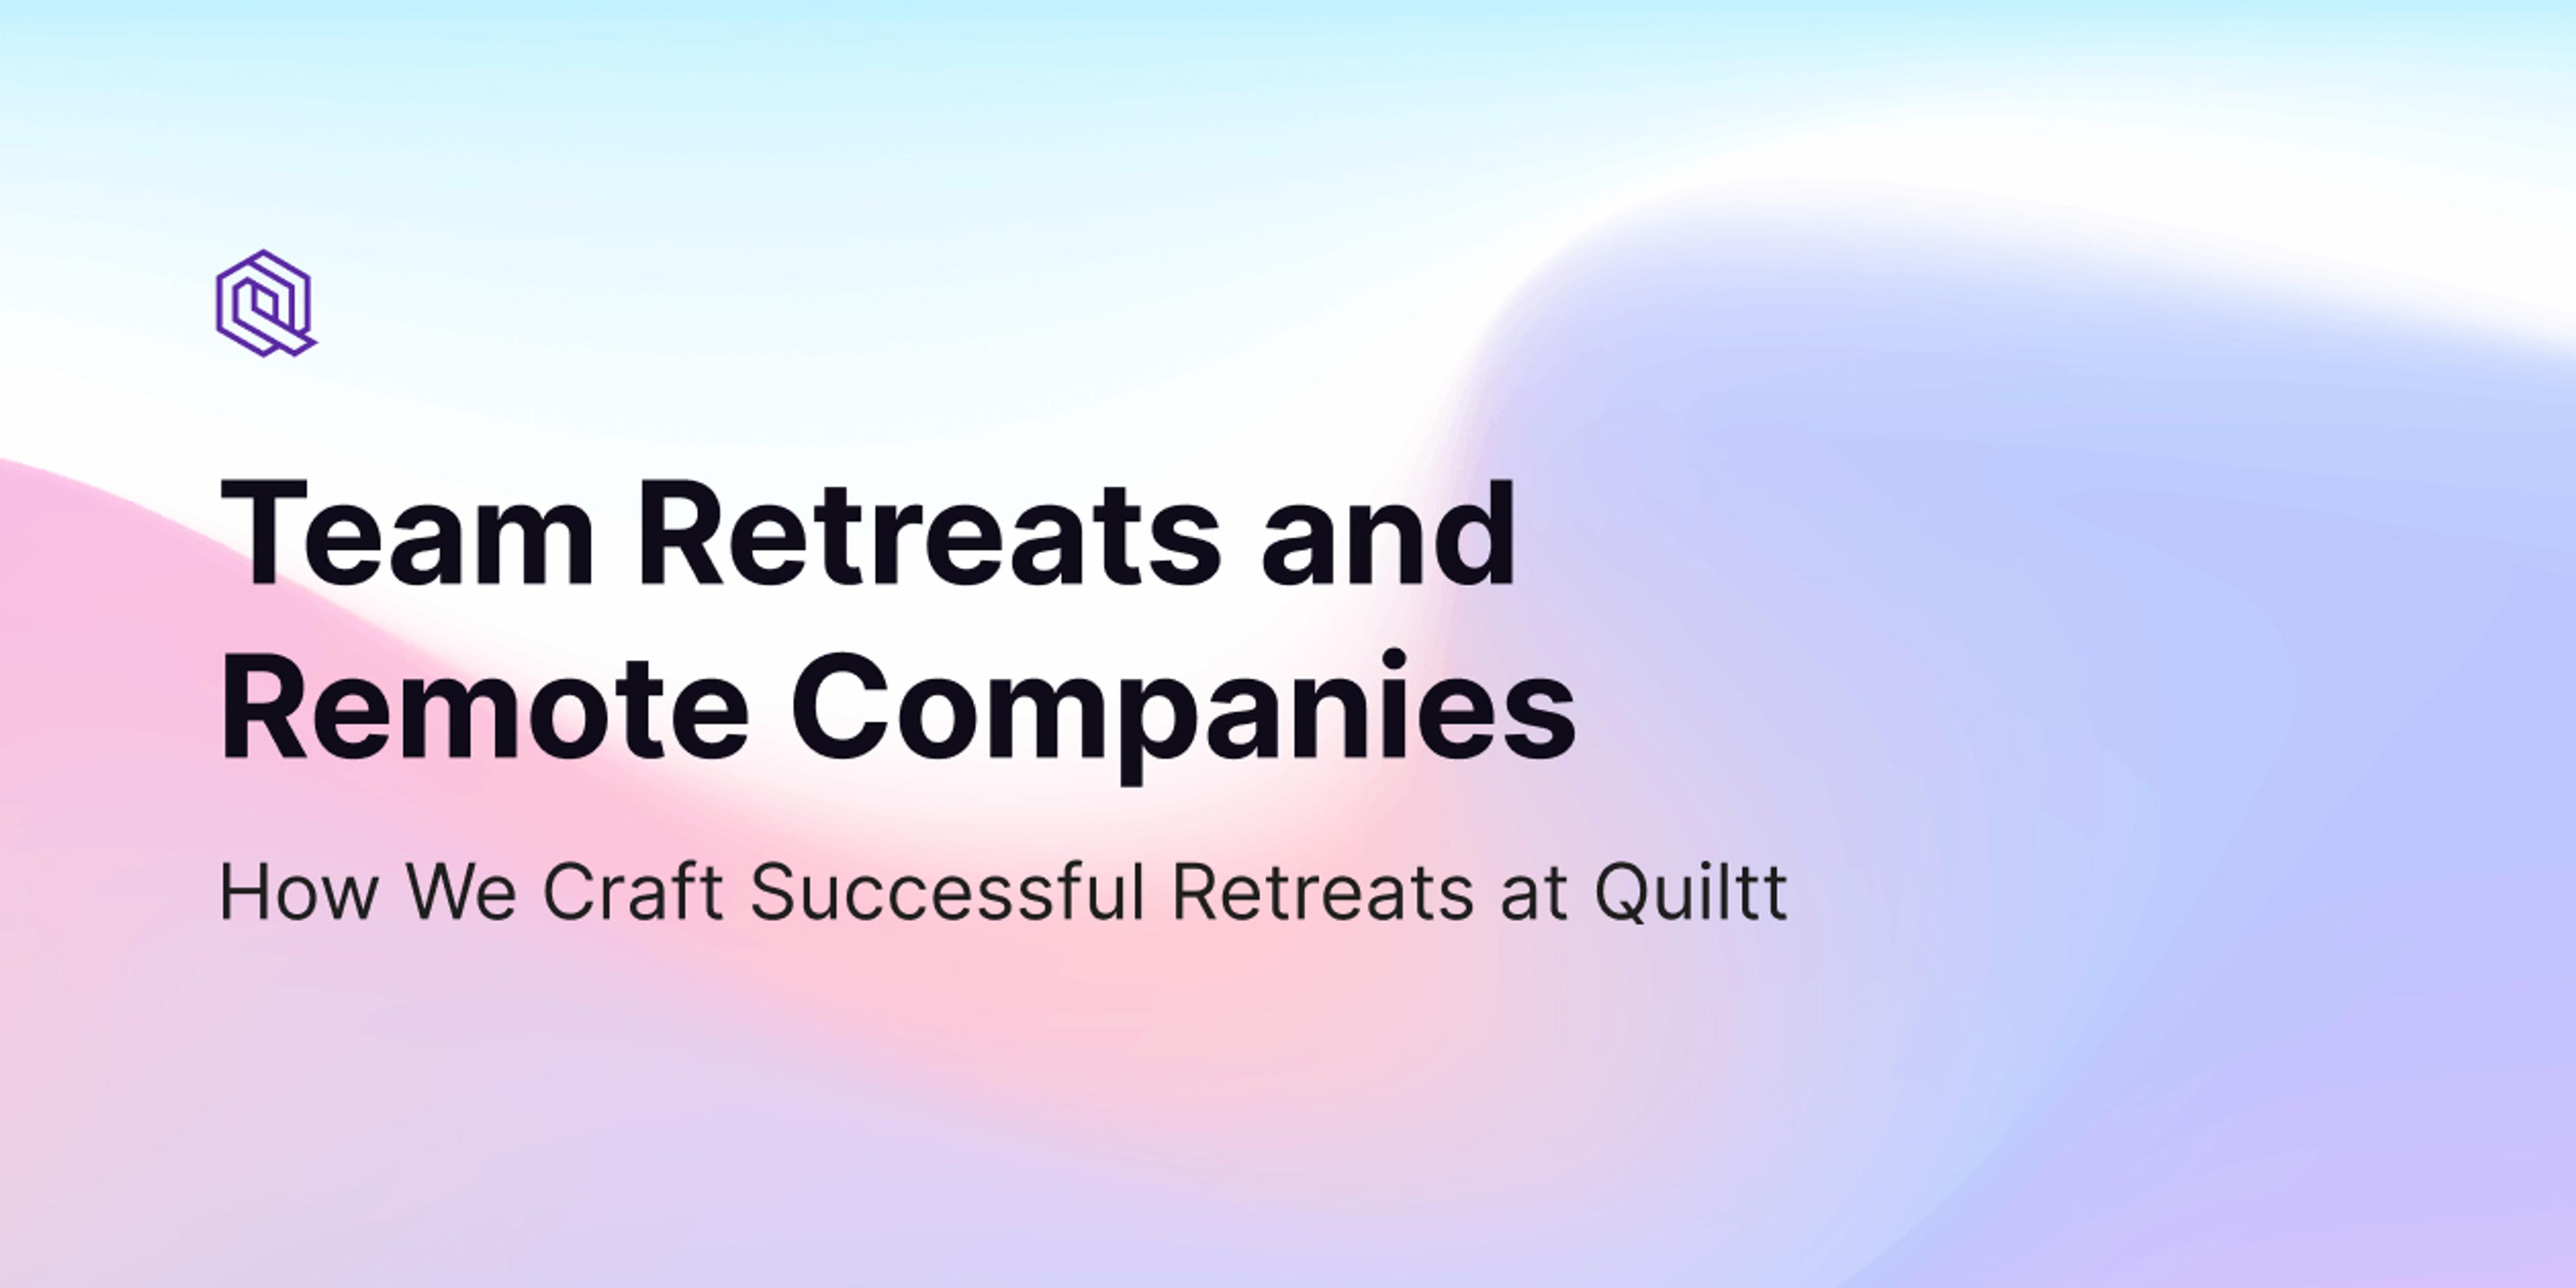 Team Retreats and Remote Companies: How We Craft Successful Retreats at Quiltt